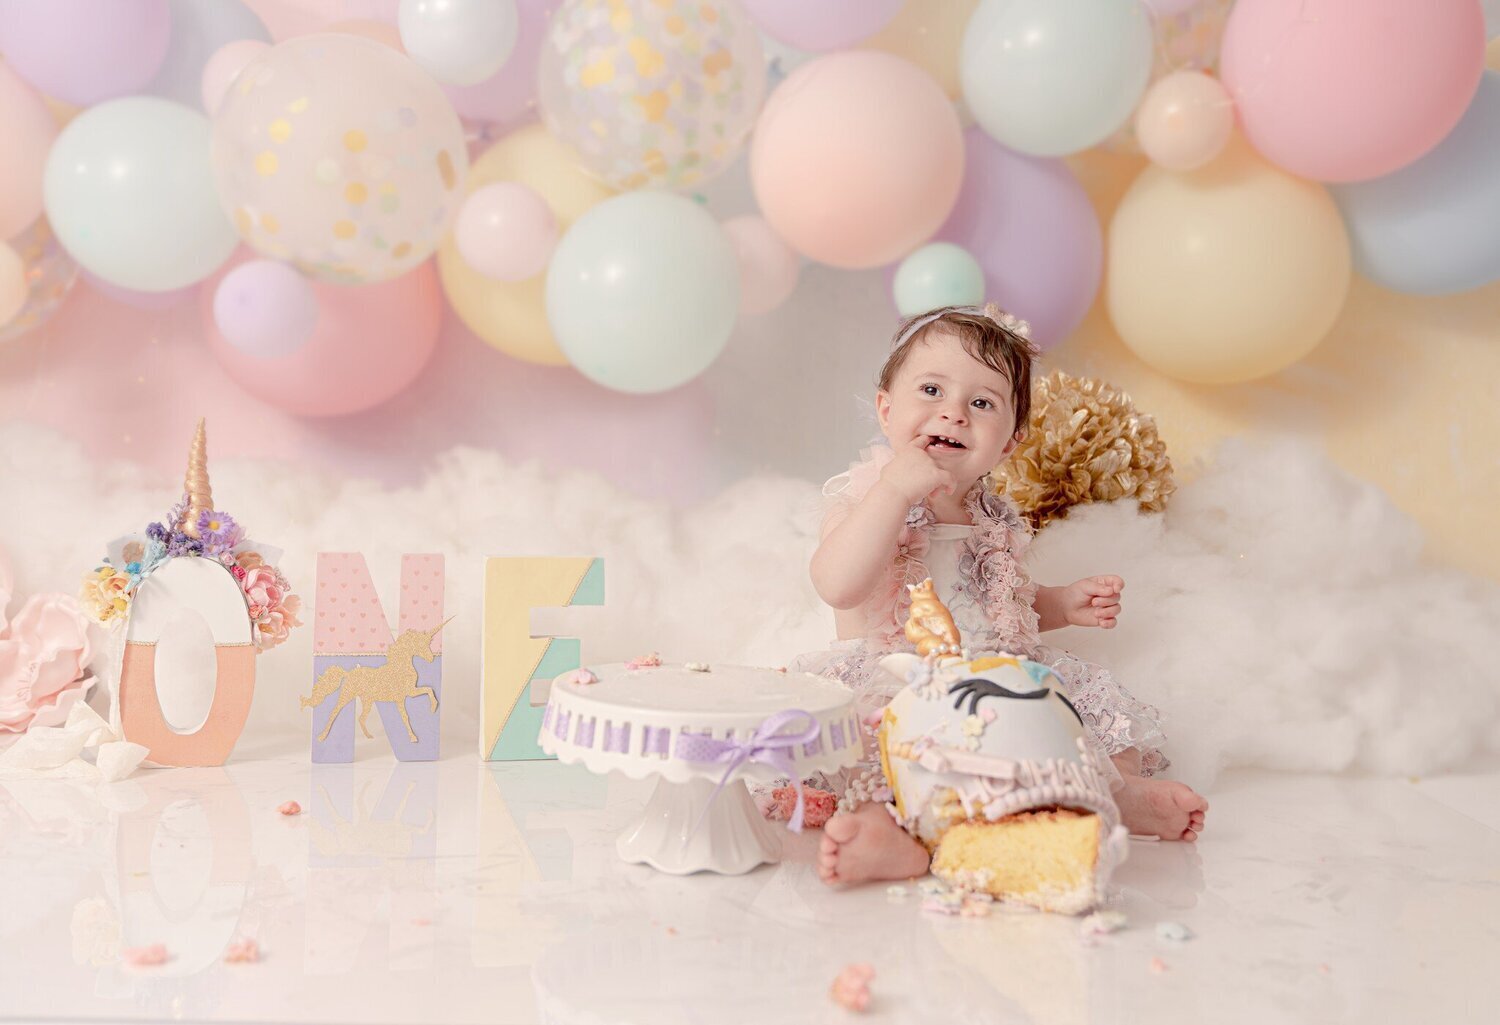 Little girl photoshoot with color balloons and a big cake